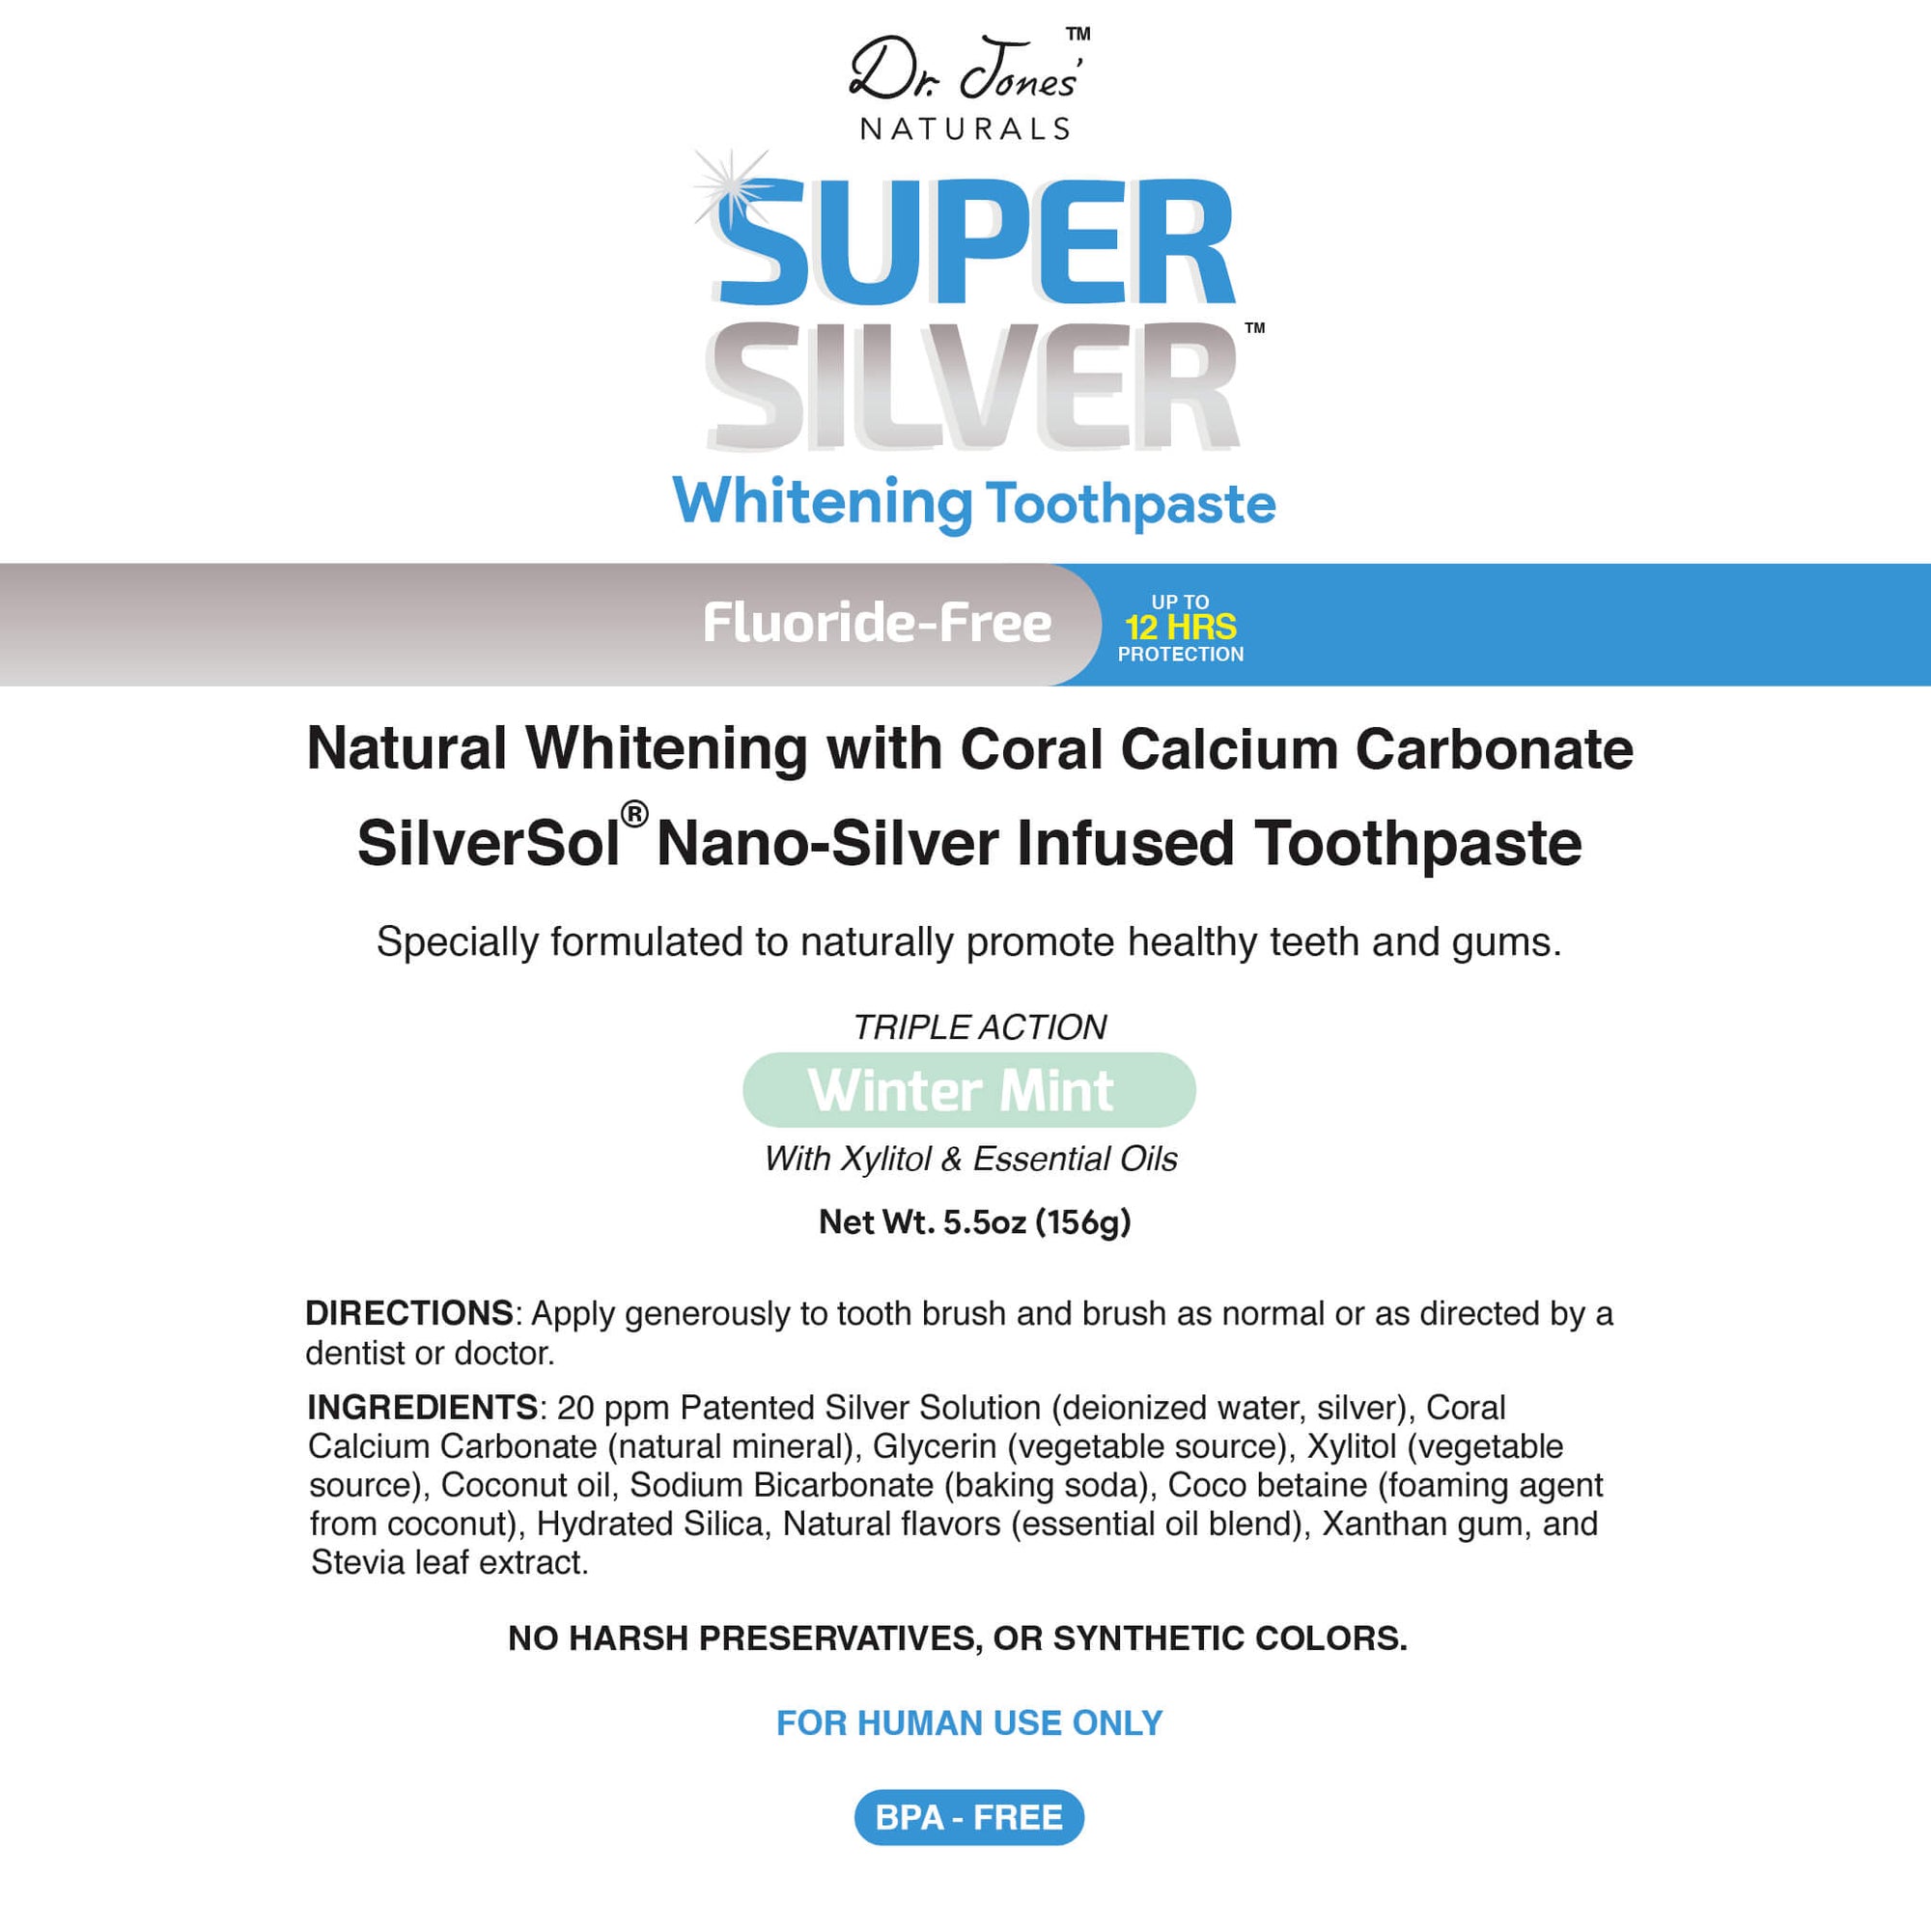  SuperSilver Whitening Toothpaste With Coral Calcium Carbonate Directions and Ingredients